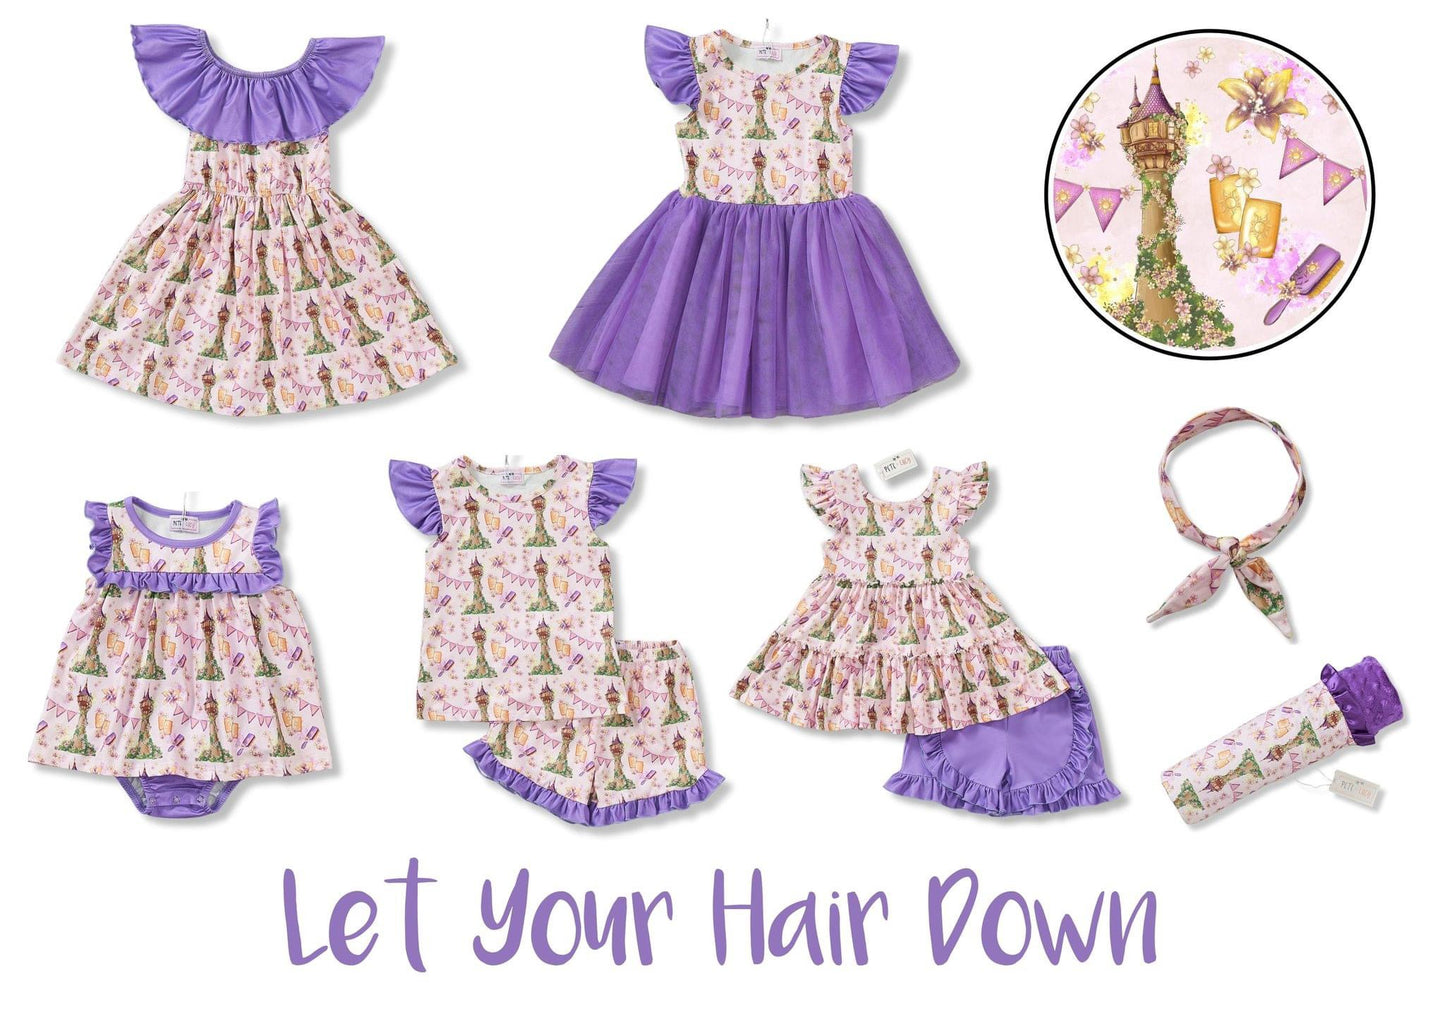 (Preorder) Let Your Hair Down Dress by Pete + Lucy